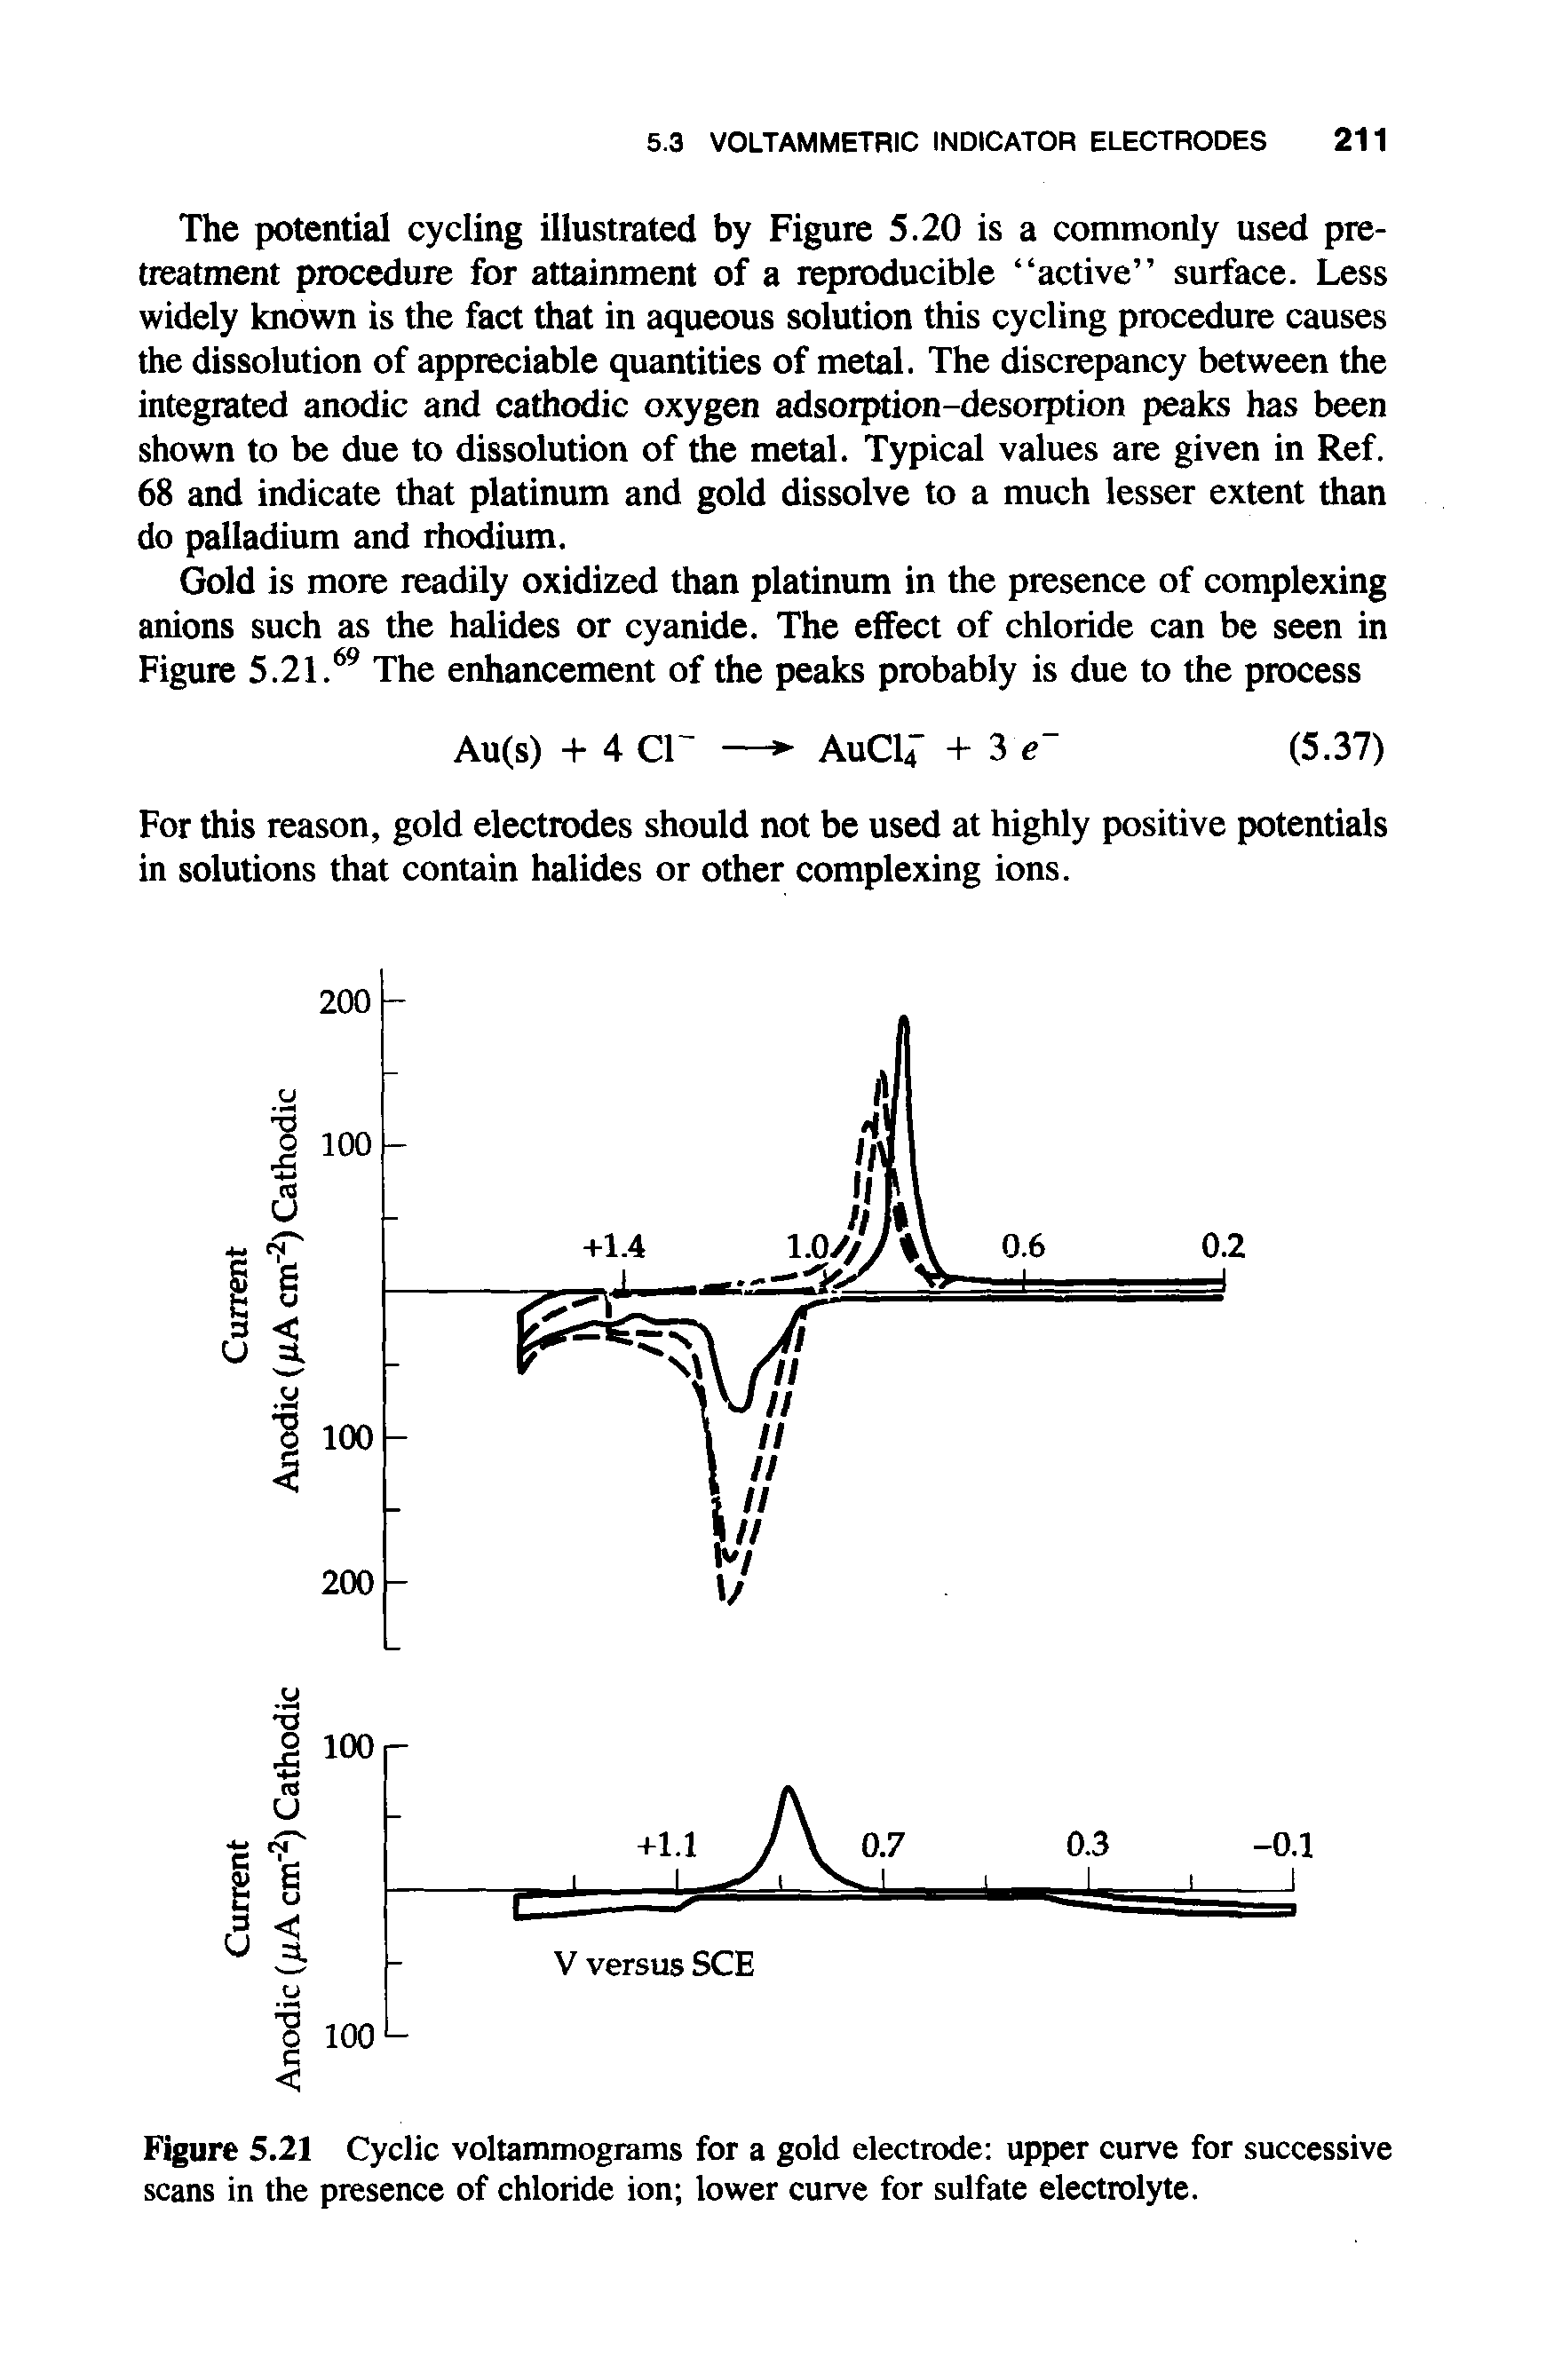 Figure 5.21 Cyclic voltammograms for a gold electrode upper curve for successive scans in the presence of chloride ion lower curve for sulfate electrolyte.